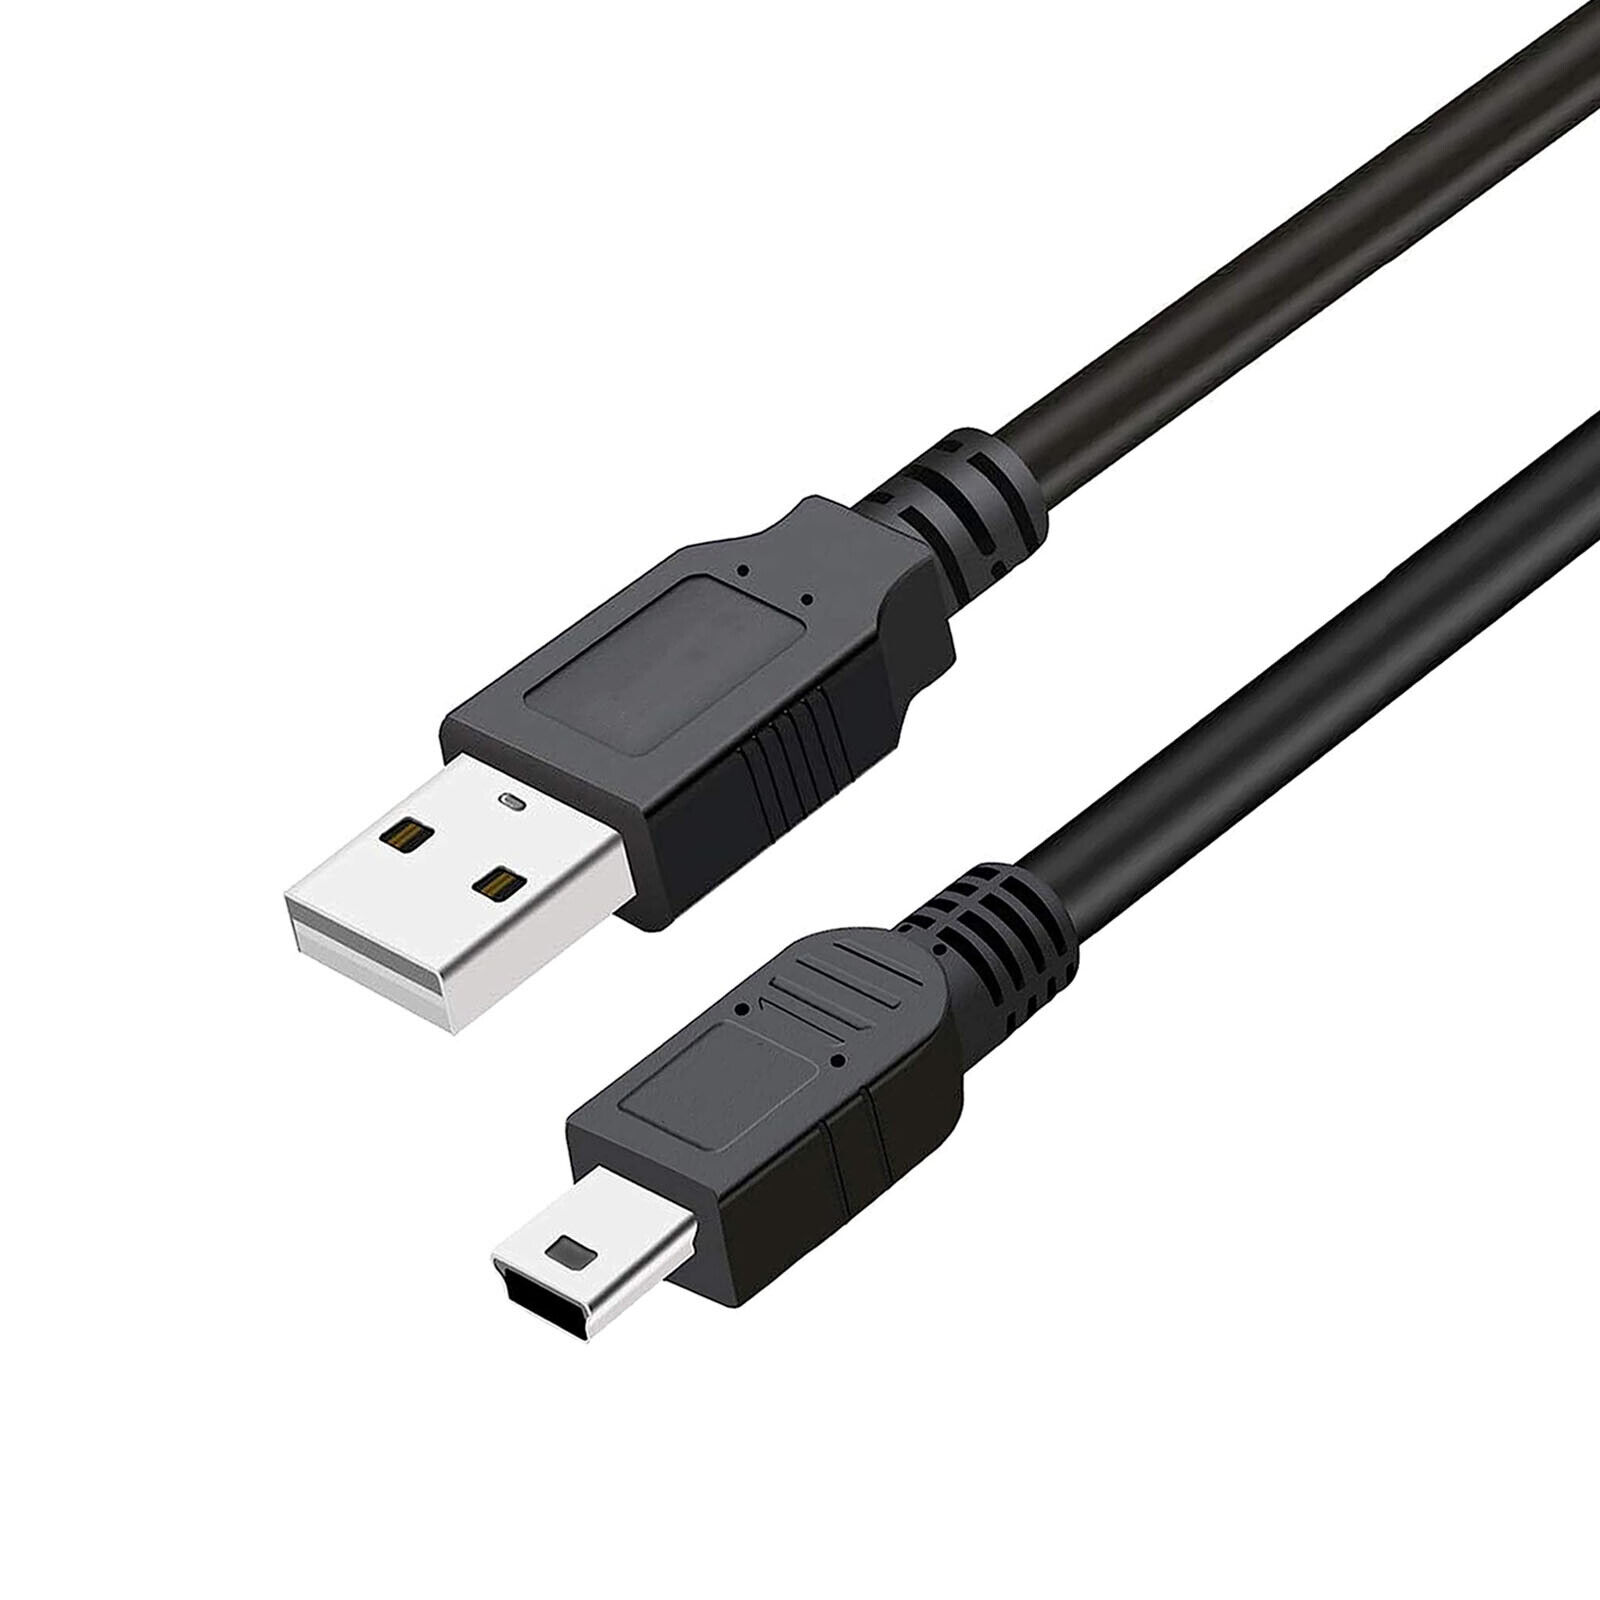 4ft Mini USB 2.0 Charging Data Cable Cord Lead for Uniden BC75XLT Scanner